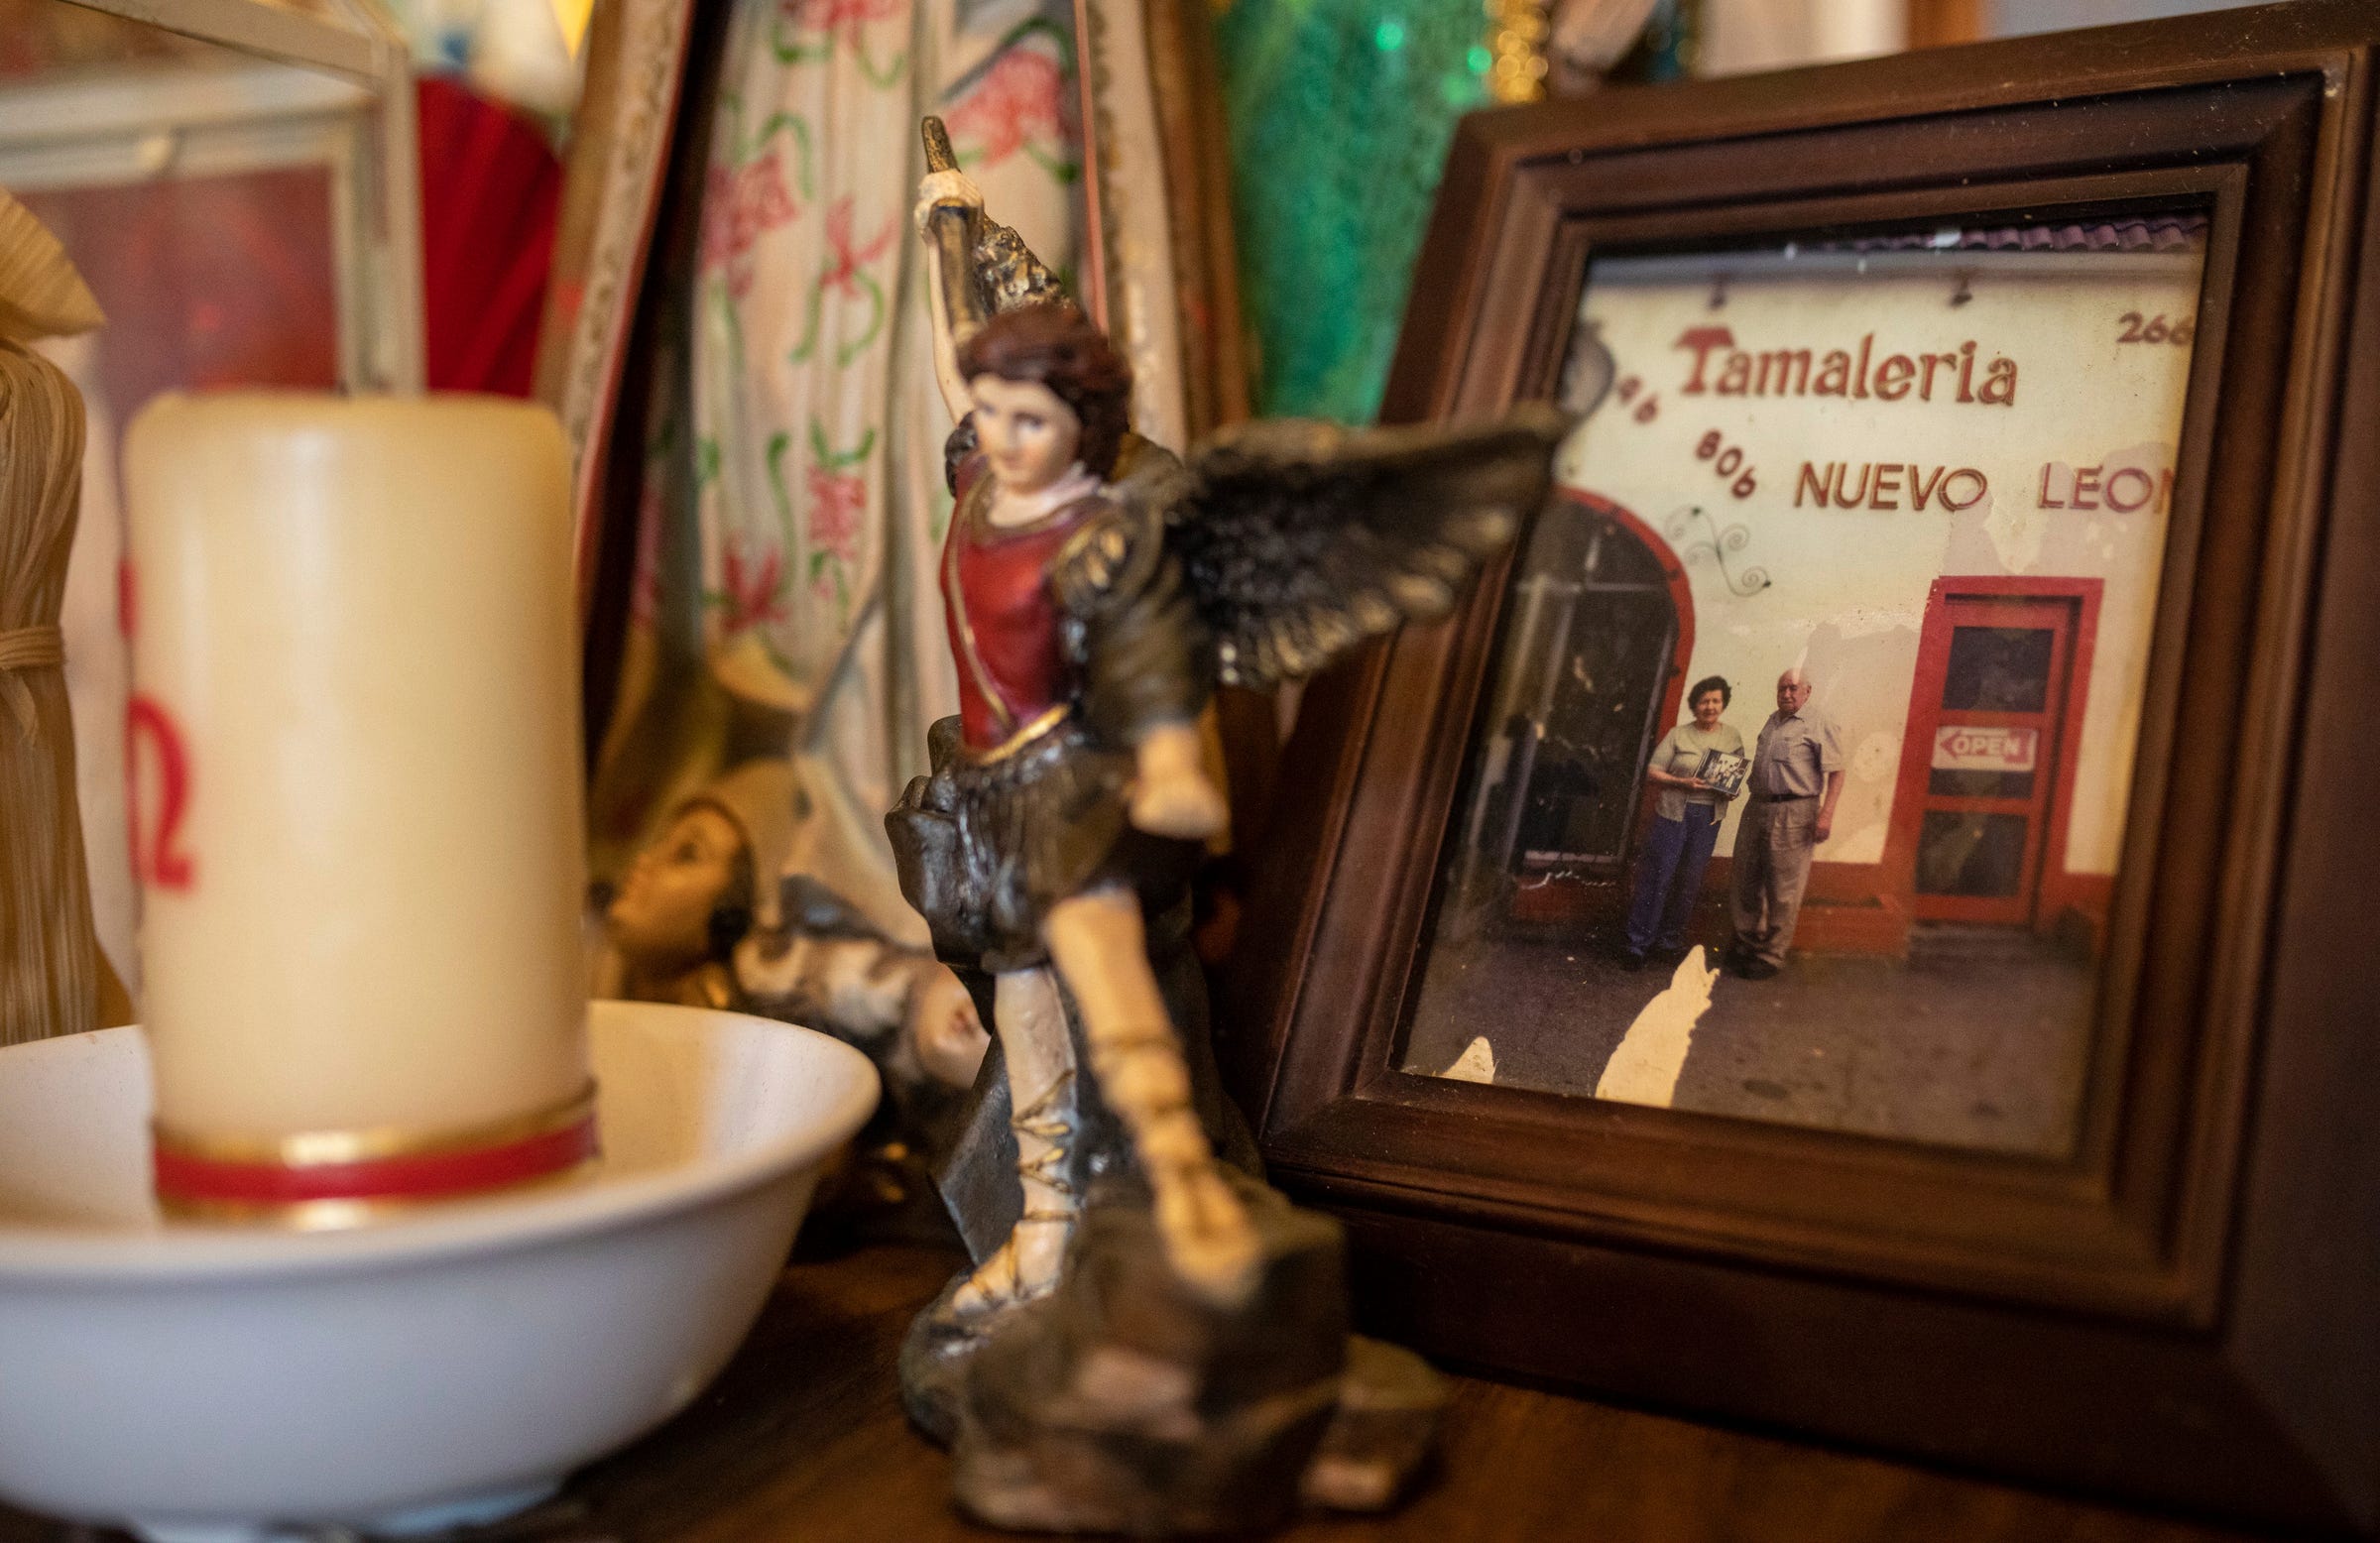 A photo of Maria Alicia Villarreal, the past owner of Tamaleria Nuevo Leon, and her husband, Pedro Villarreal, standing in front of Tamaleria Nuevo Leon, sits on a small table inside the business in Detroit's Mexicantown on Friday, March 3, 2023.